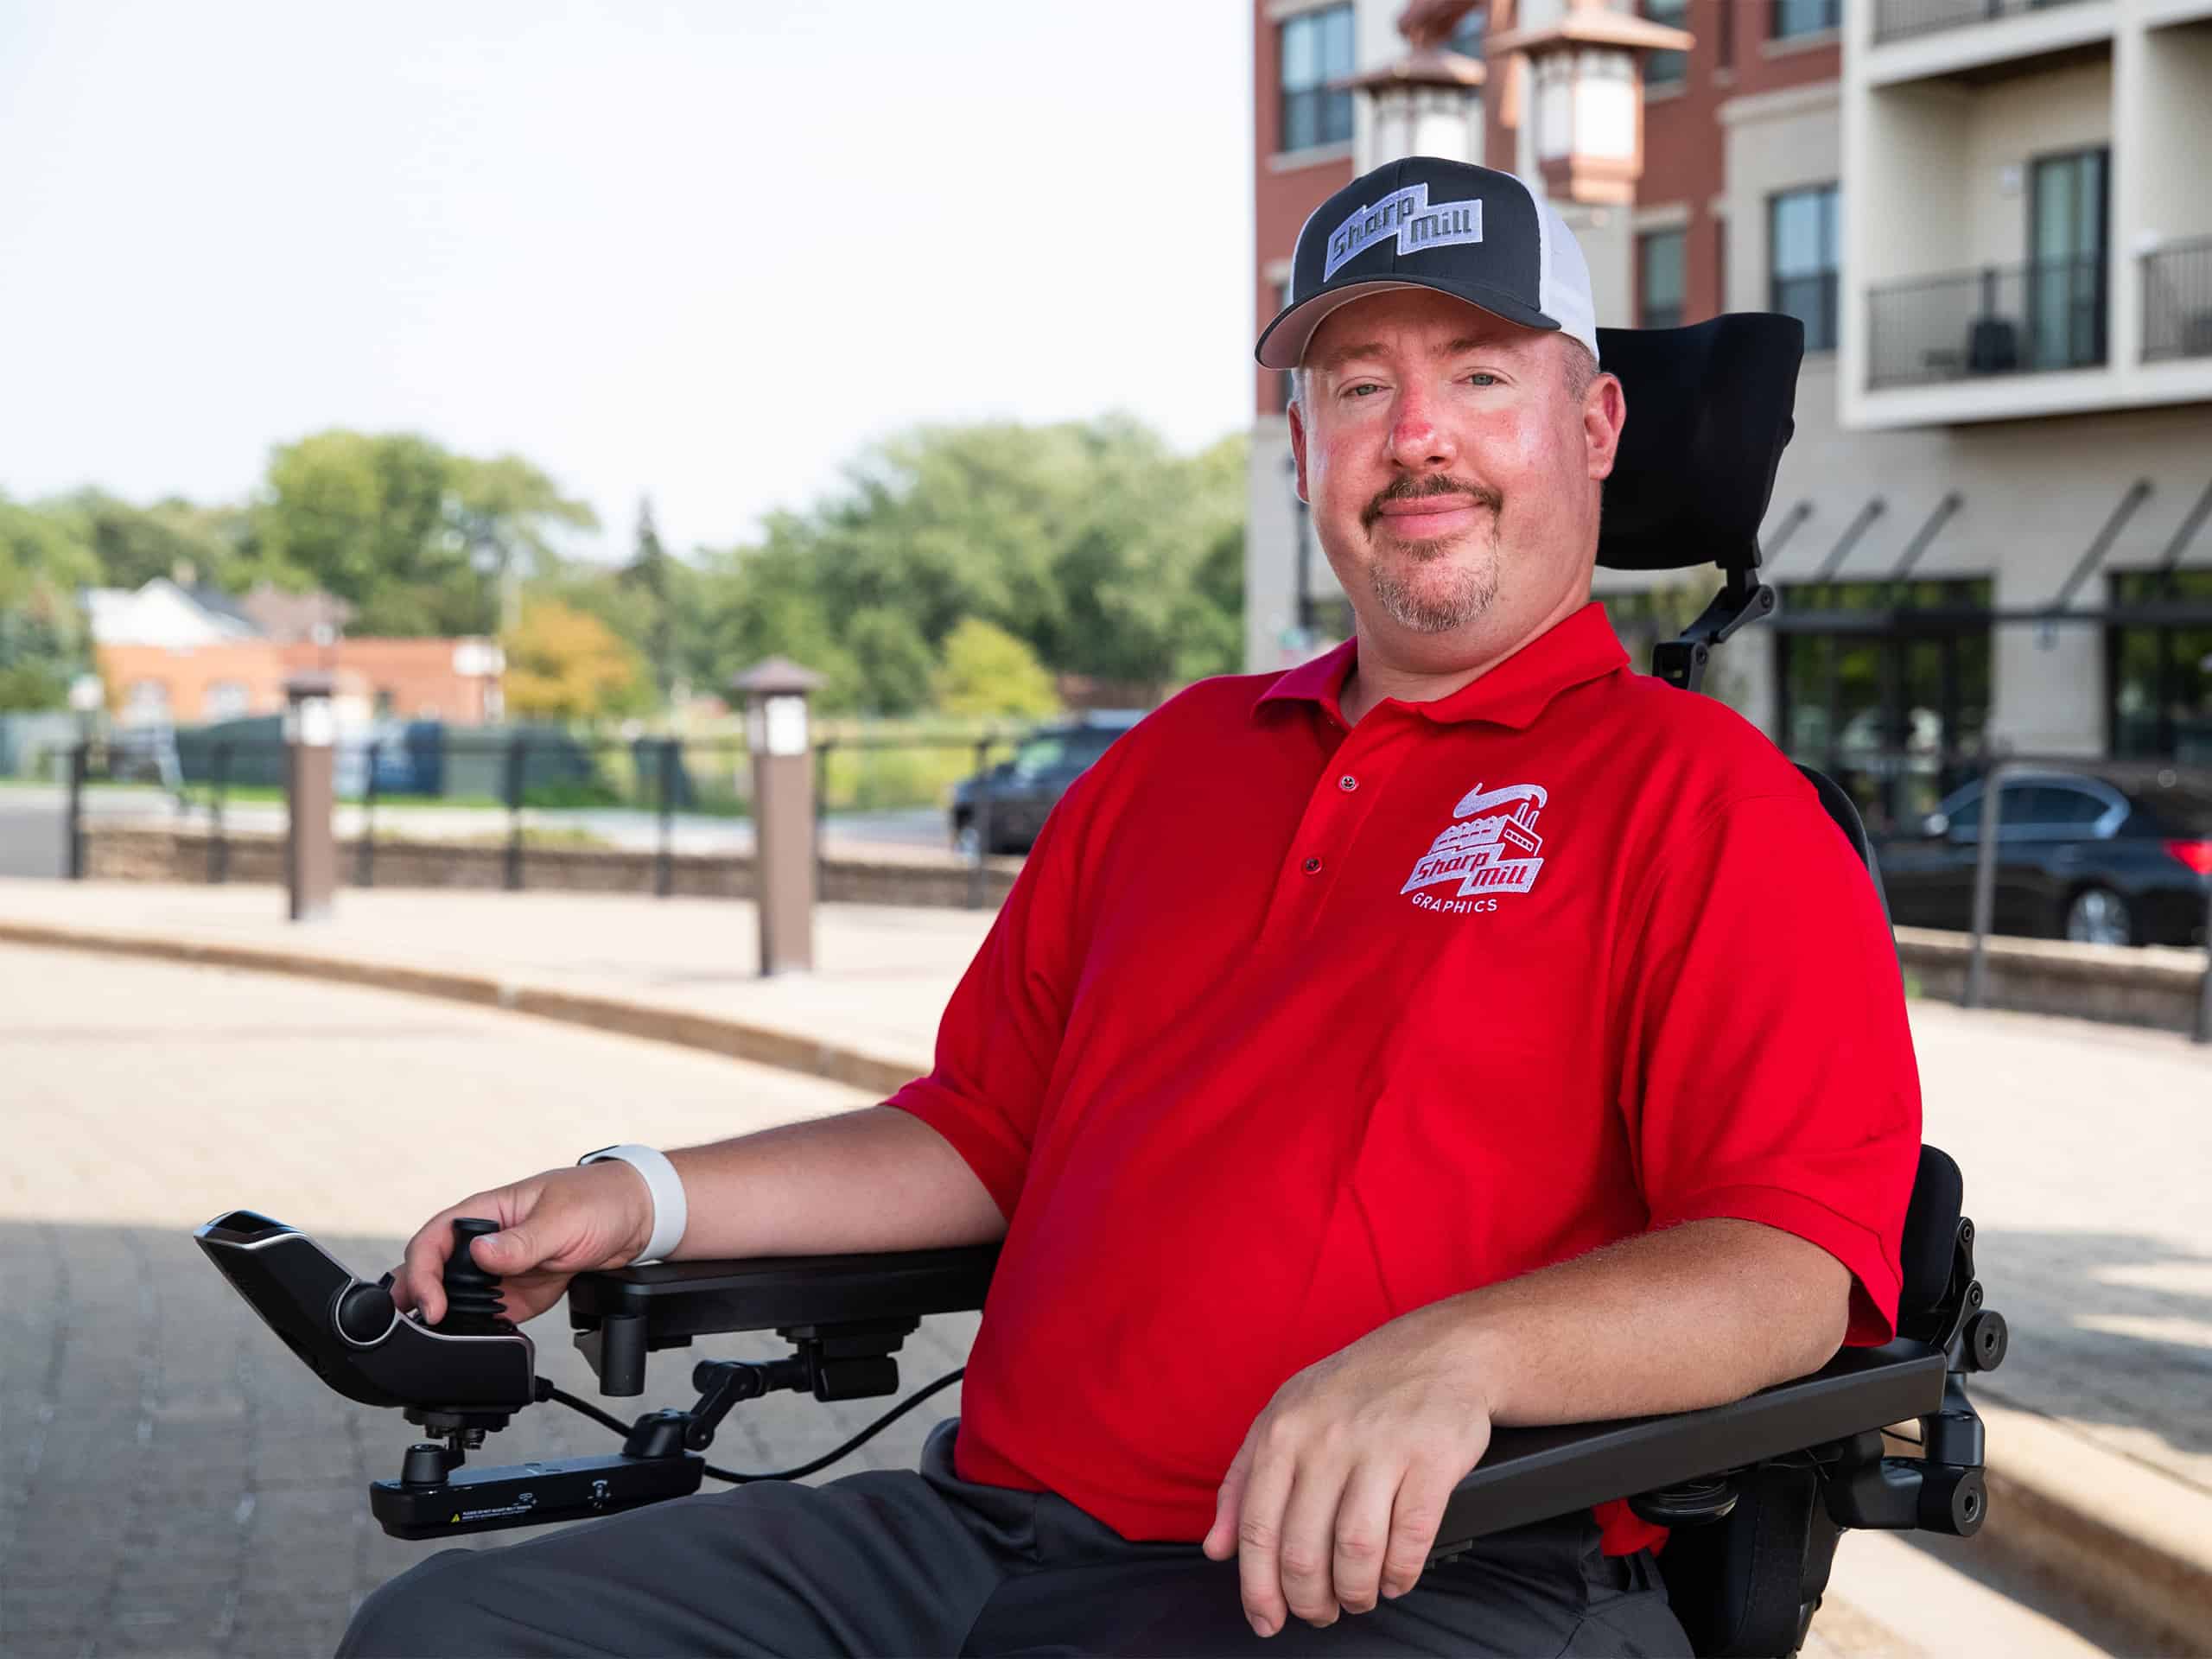 A man in a red shirt sitting in a wheel chair.